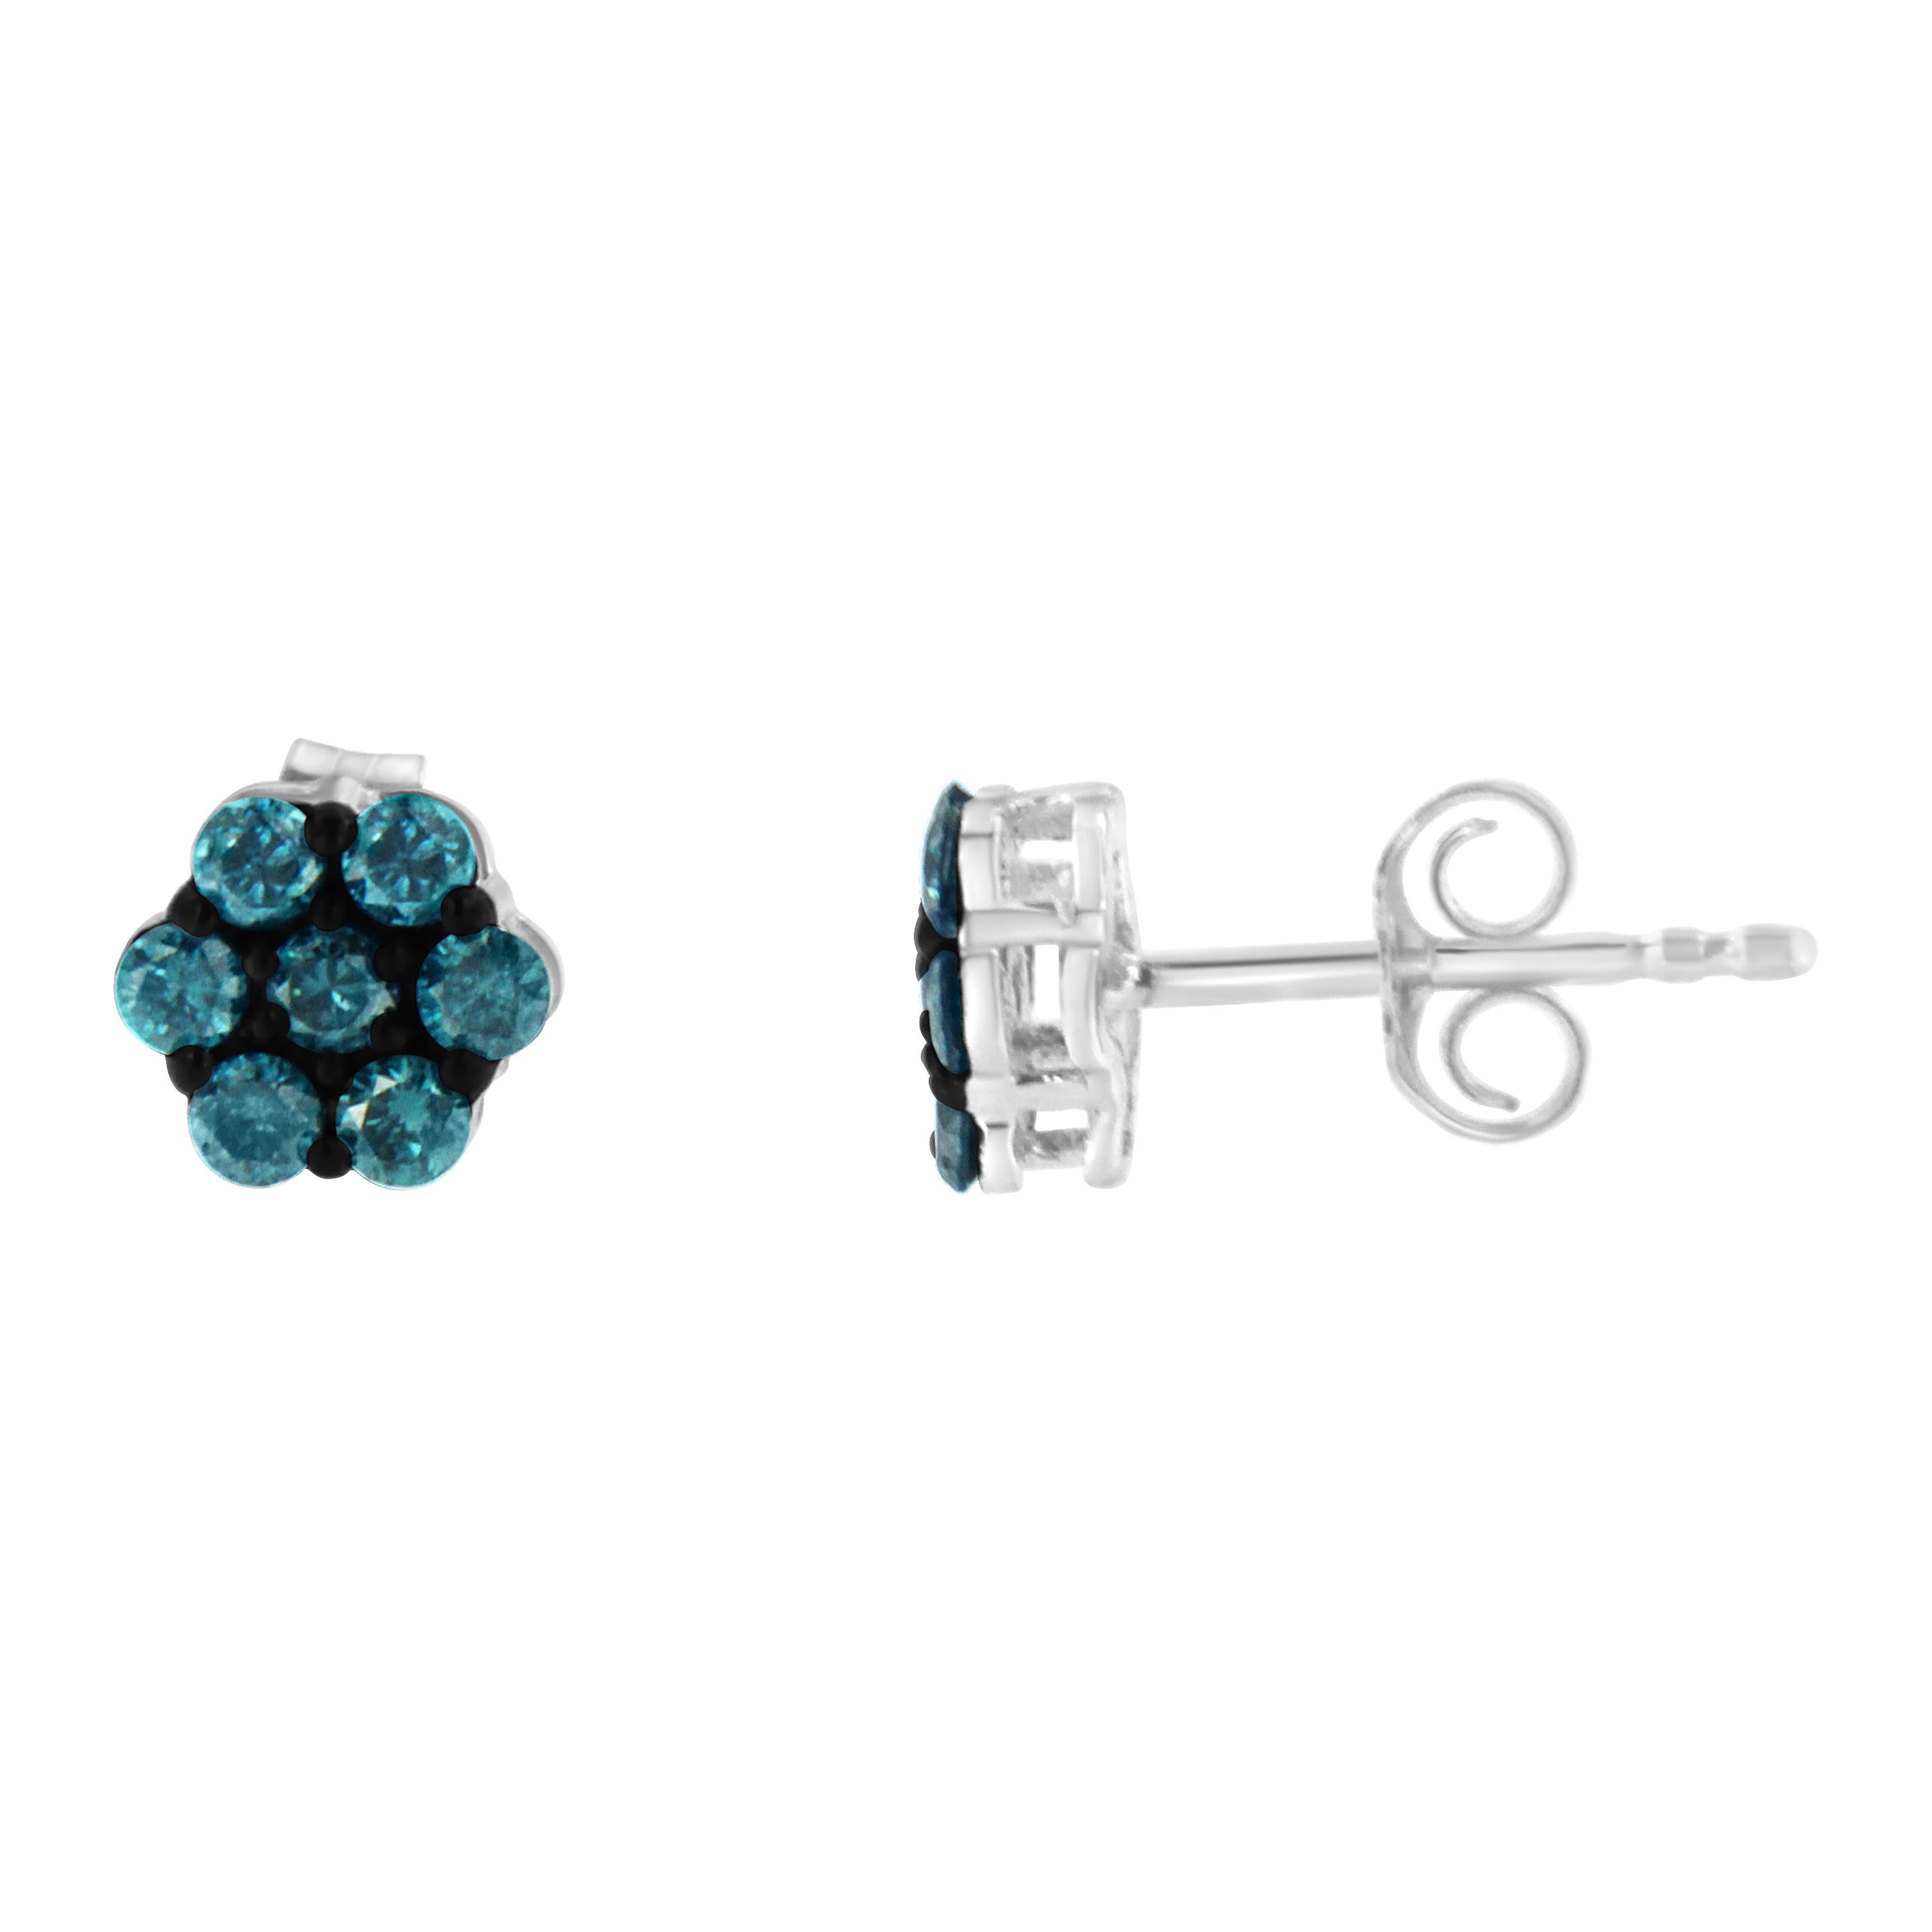 Inspired by nature, these floral diamond earrings feature the adornment of 0.5 carats black and treated blue rose cut diamonds. The earrings are composed of alluring sterling silver that is highly polished to shine. Wearing of this pair of earrings